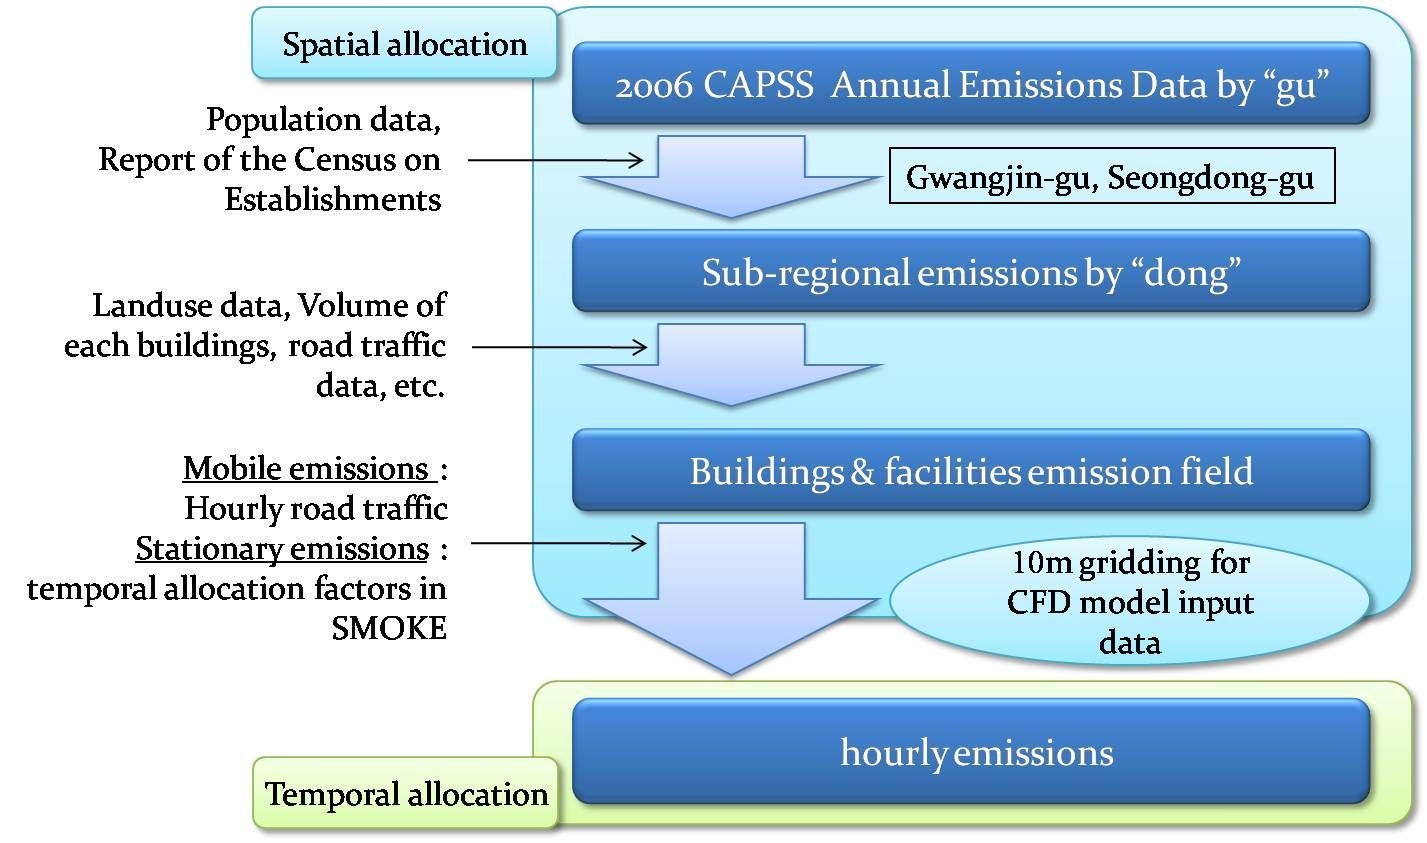 Figure 1.3.7. Working process for developing micro-scale emissions inventory